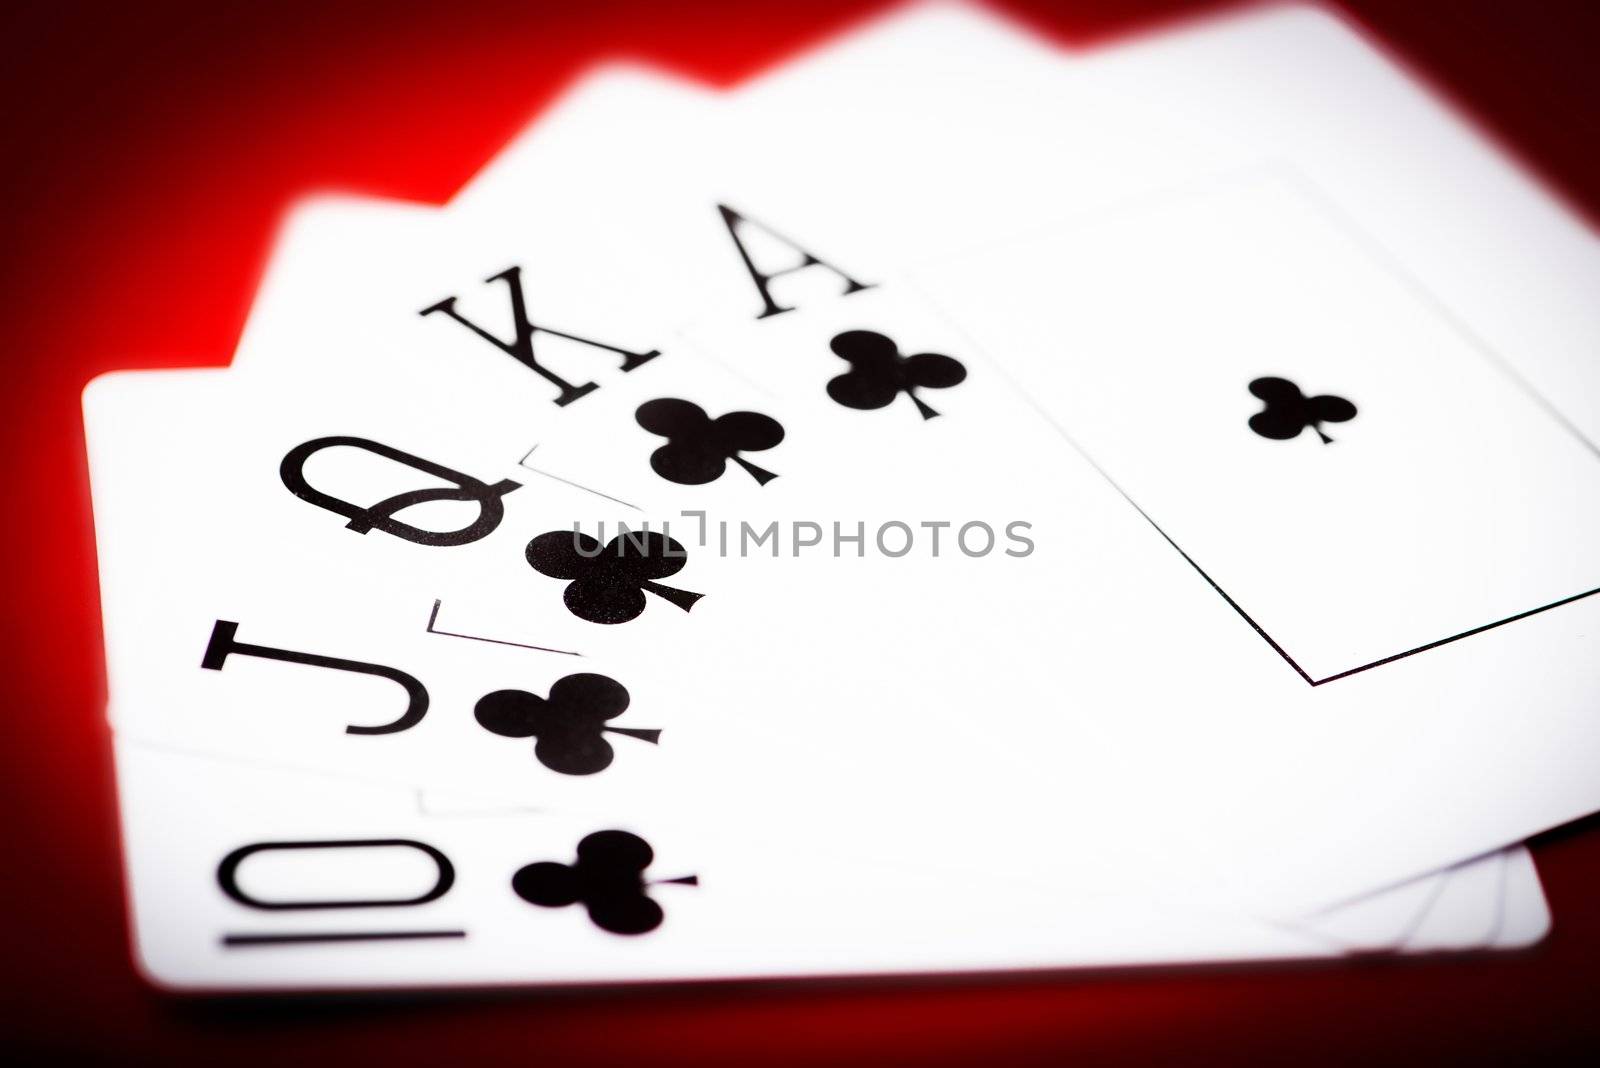 Royal flash of clubs on red poker table